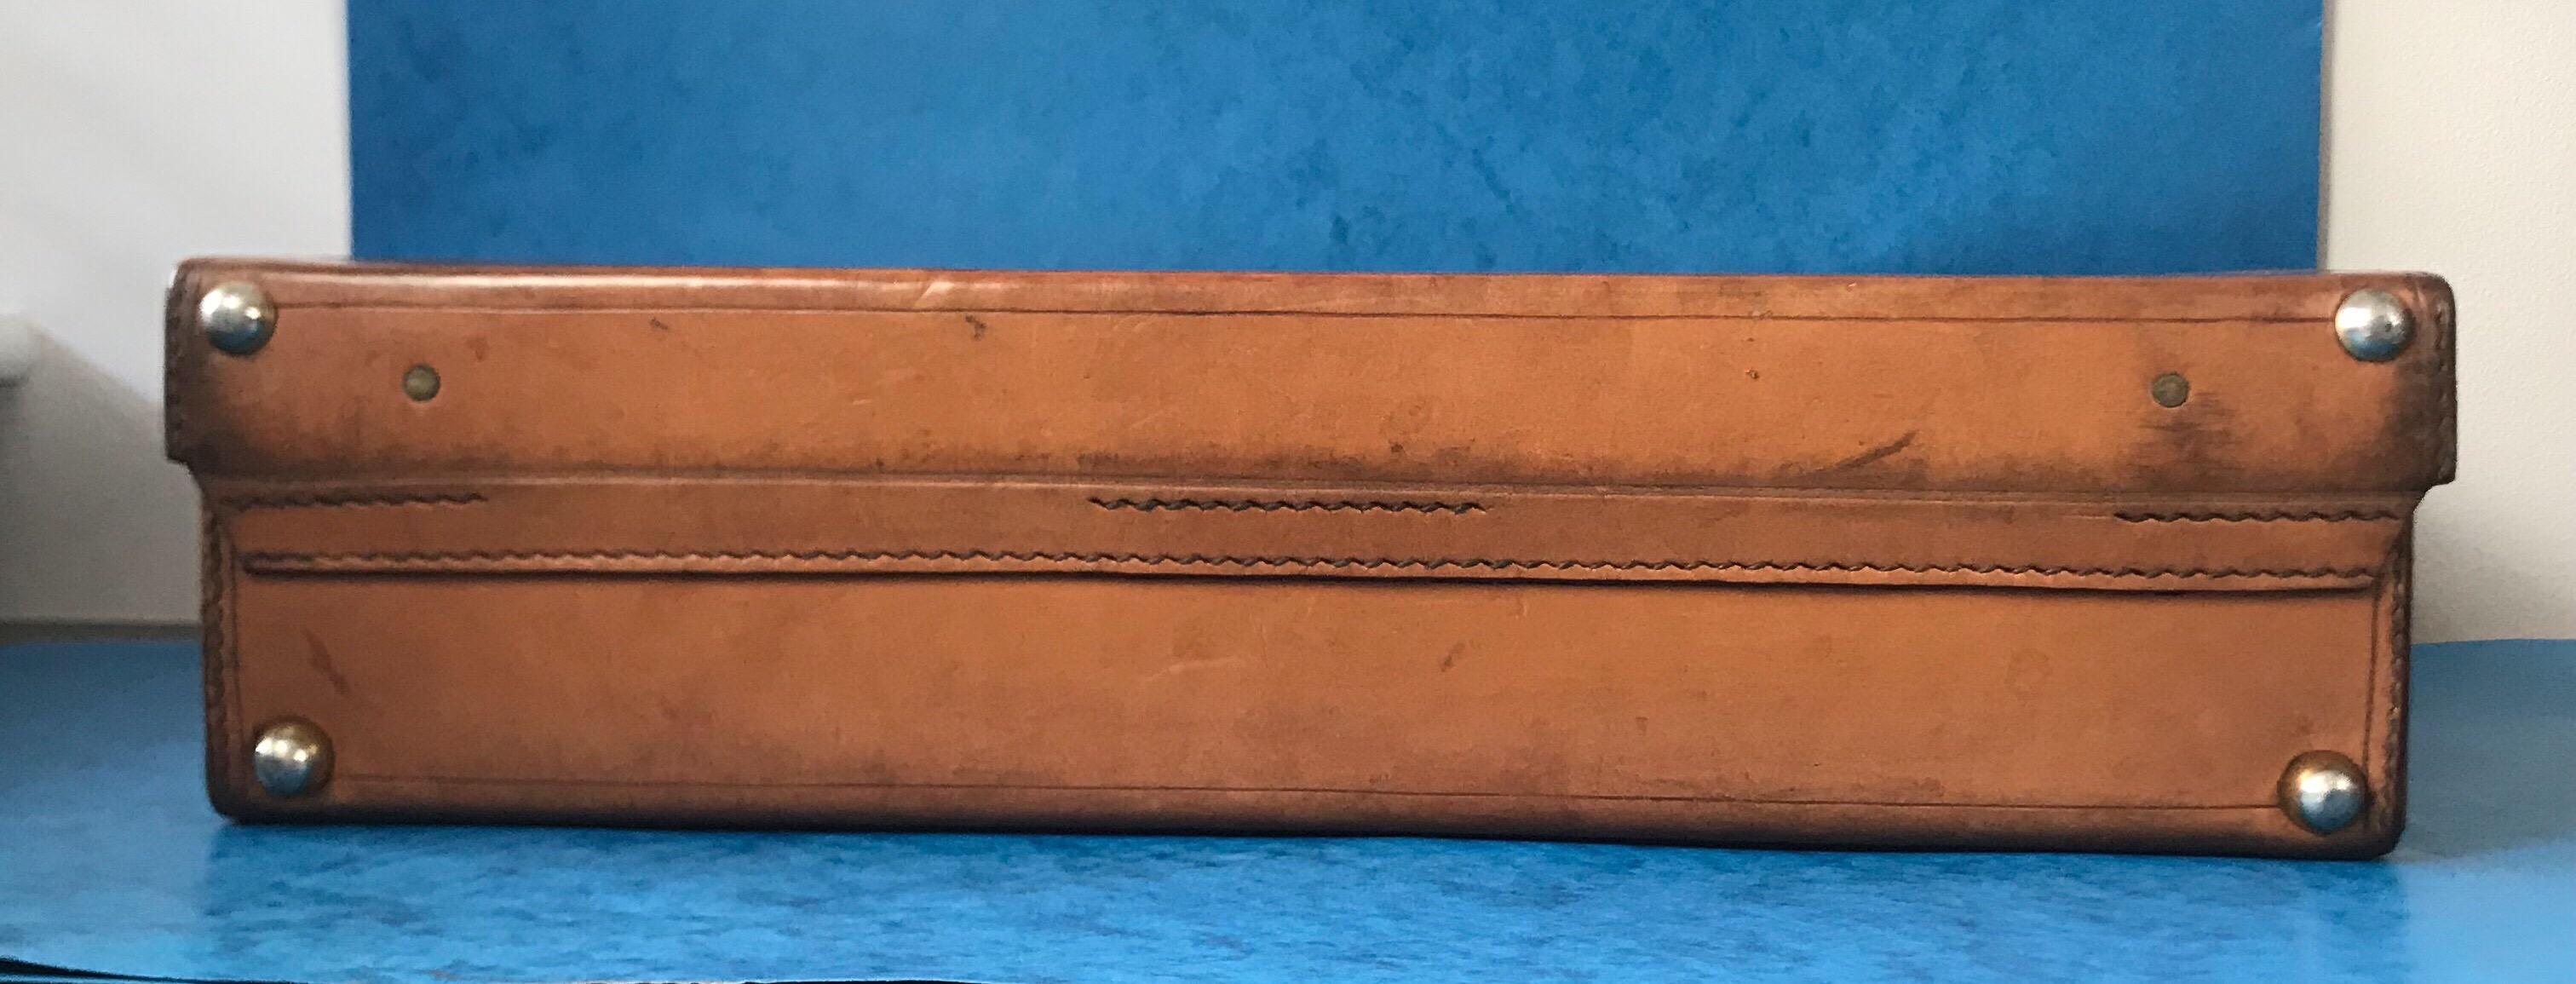 1960-1970 Hide Leather Attaché Case by “W & H Gidden” In Good Condition In Windsor, Berkshire